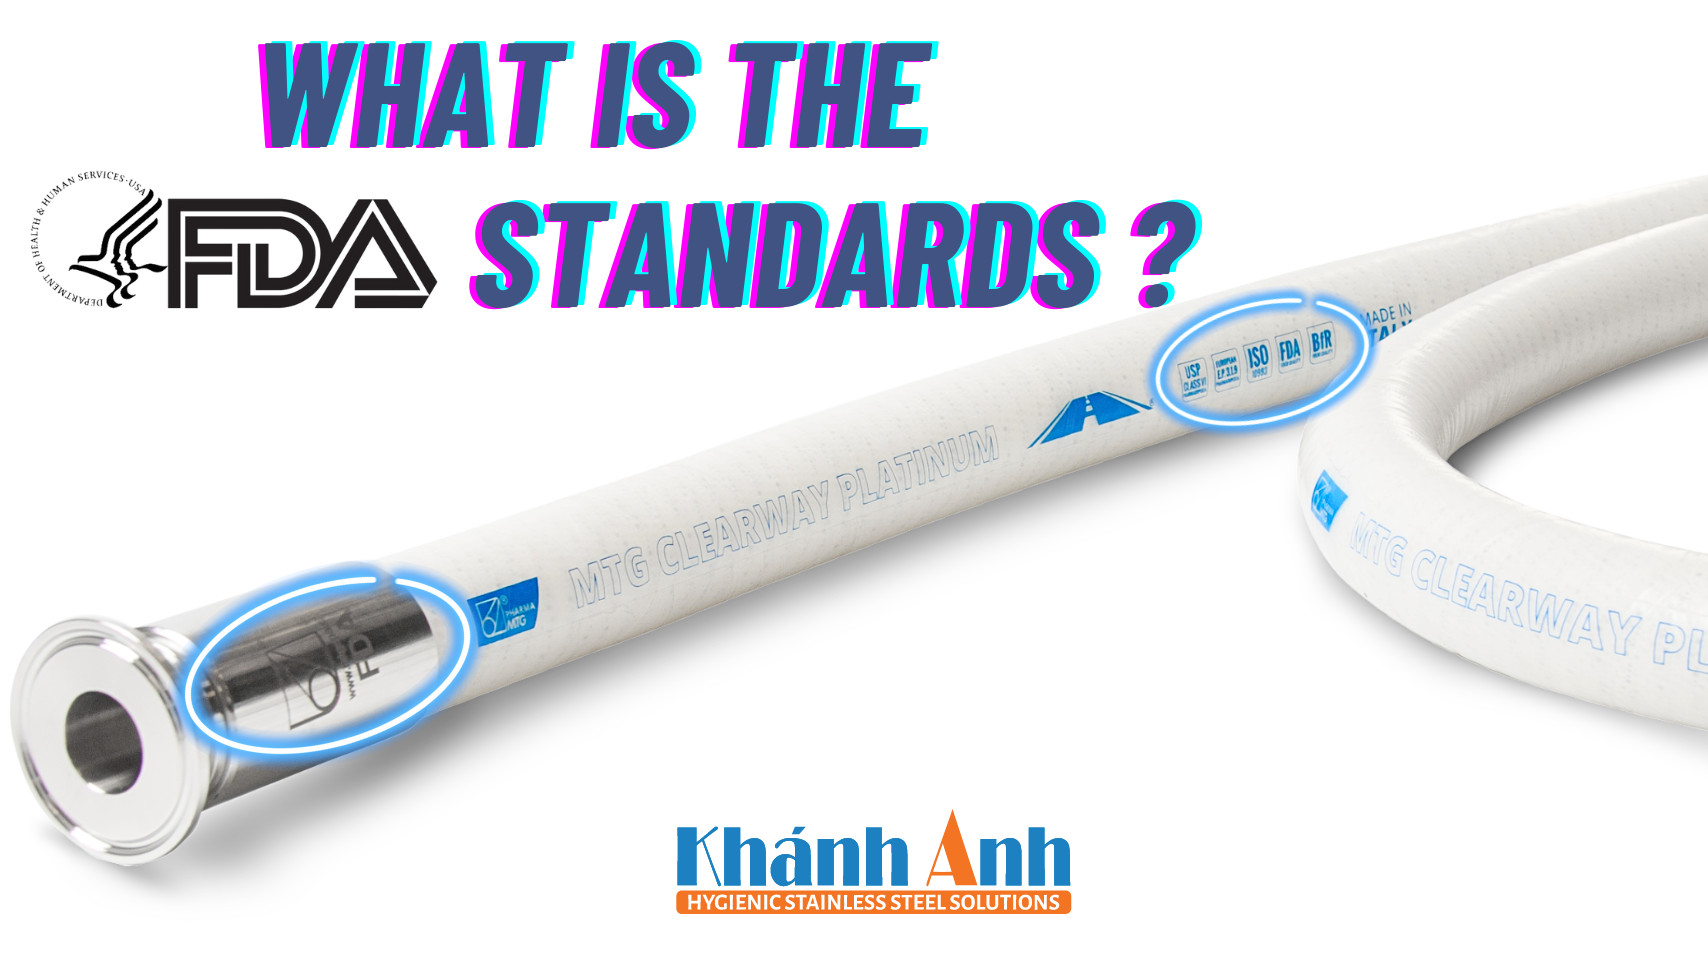 What is the FDA standards ?